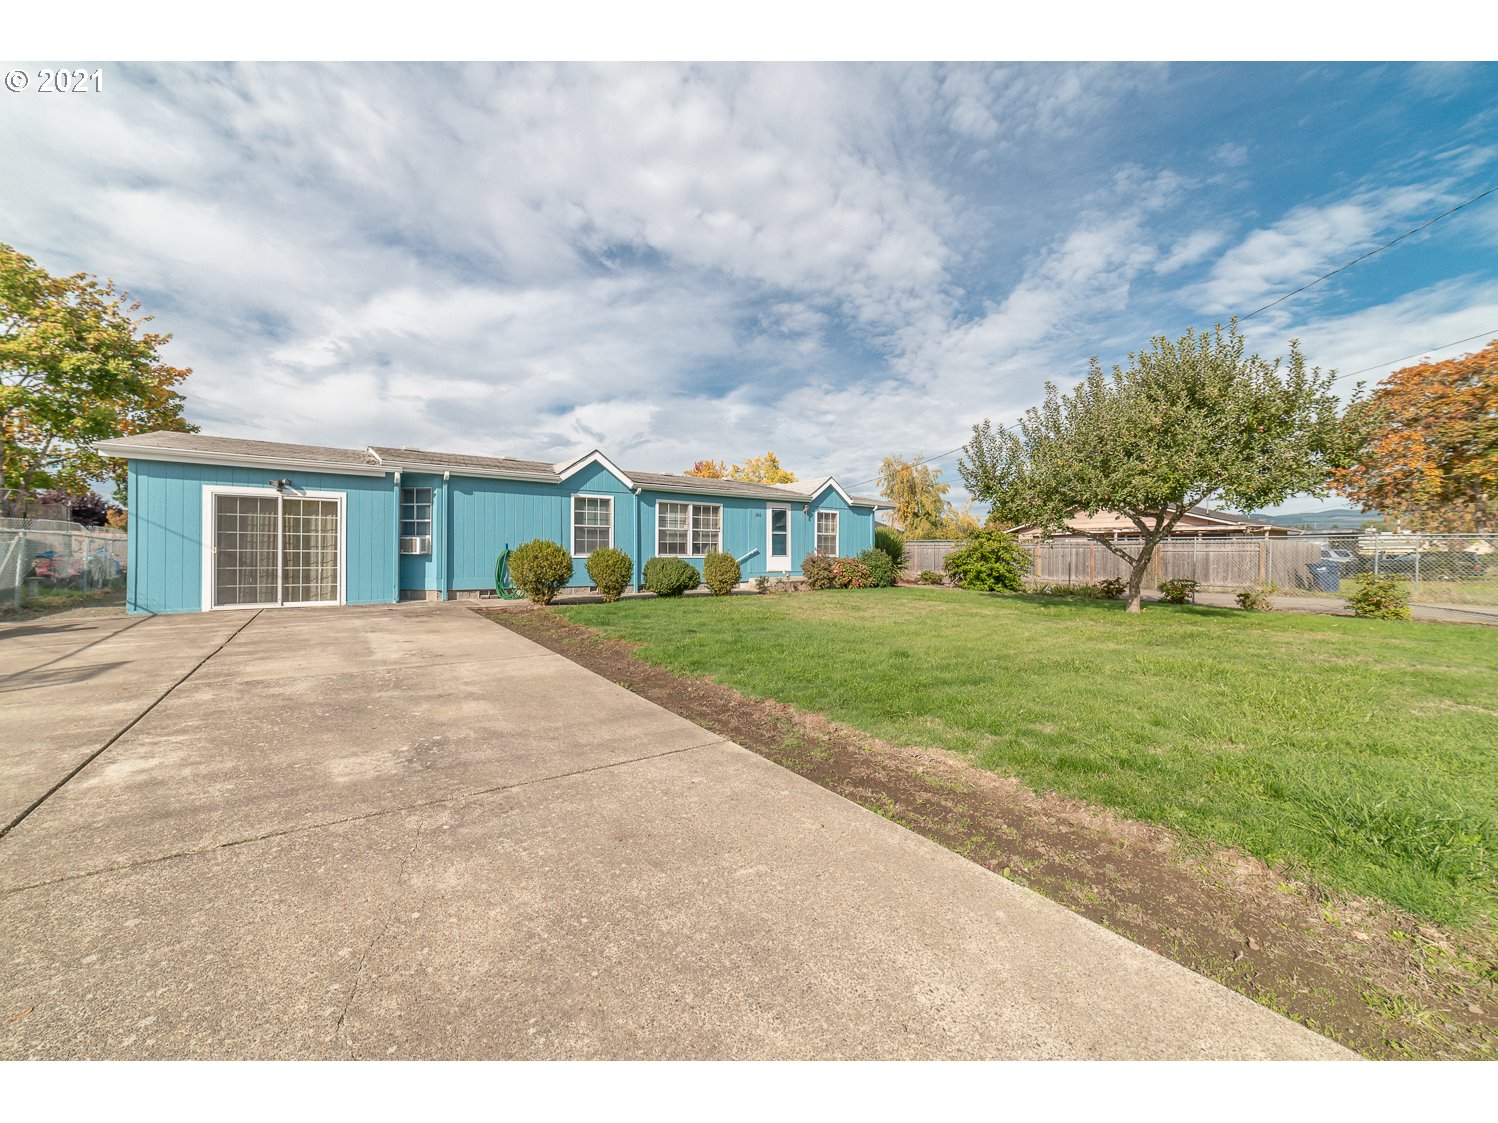 366 S 42ND PL (1 of 28)